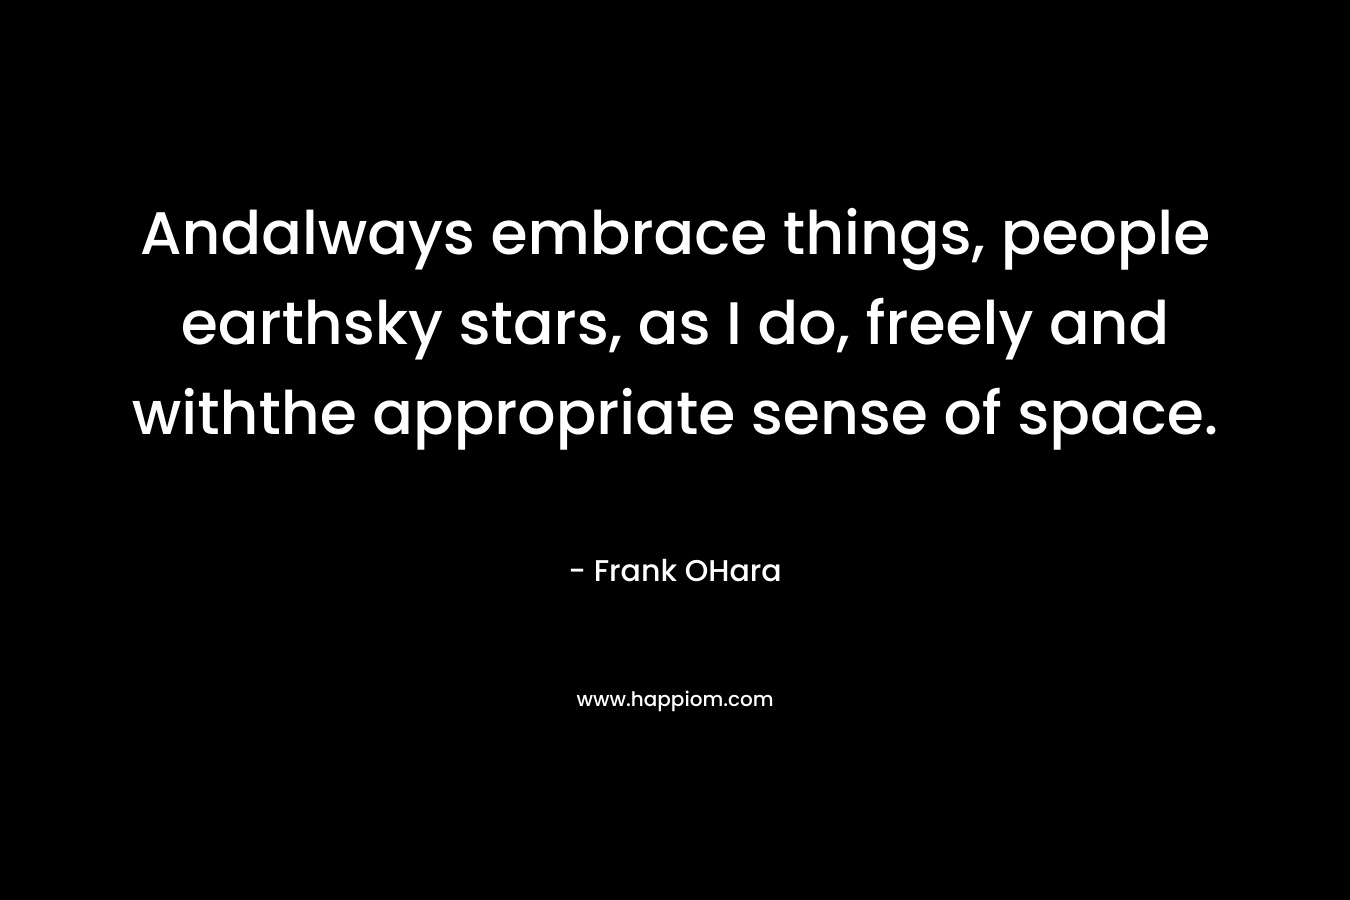 Andalways embrace things, people earthsky stars, as I do, freely and withthe appropriate sense of space.  – Frank OHara